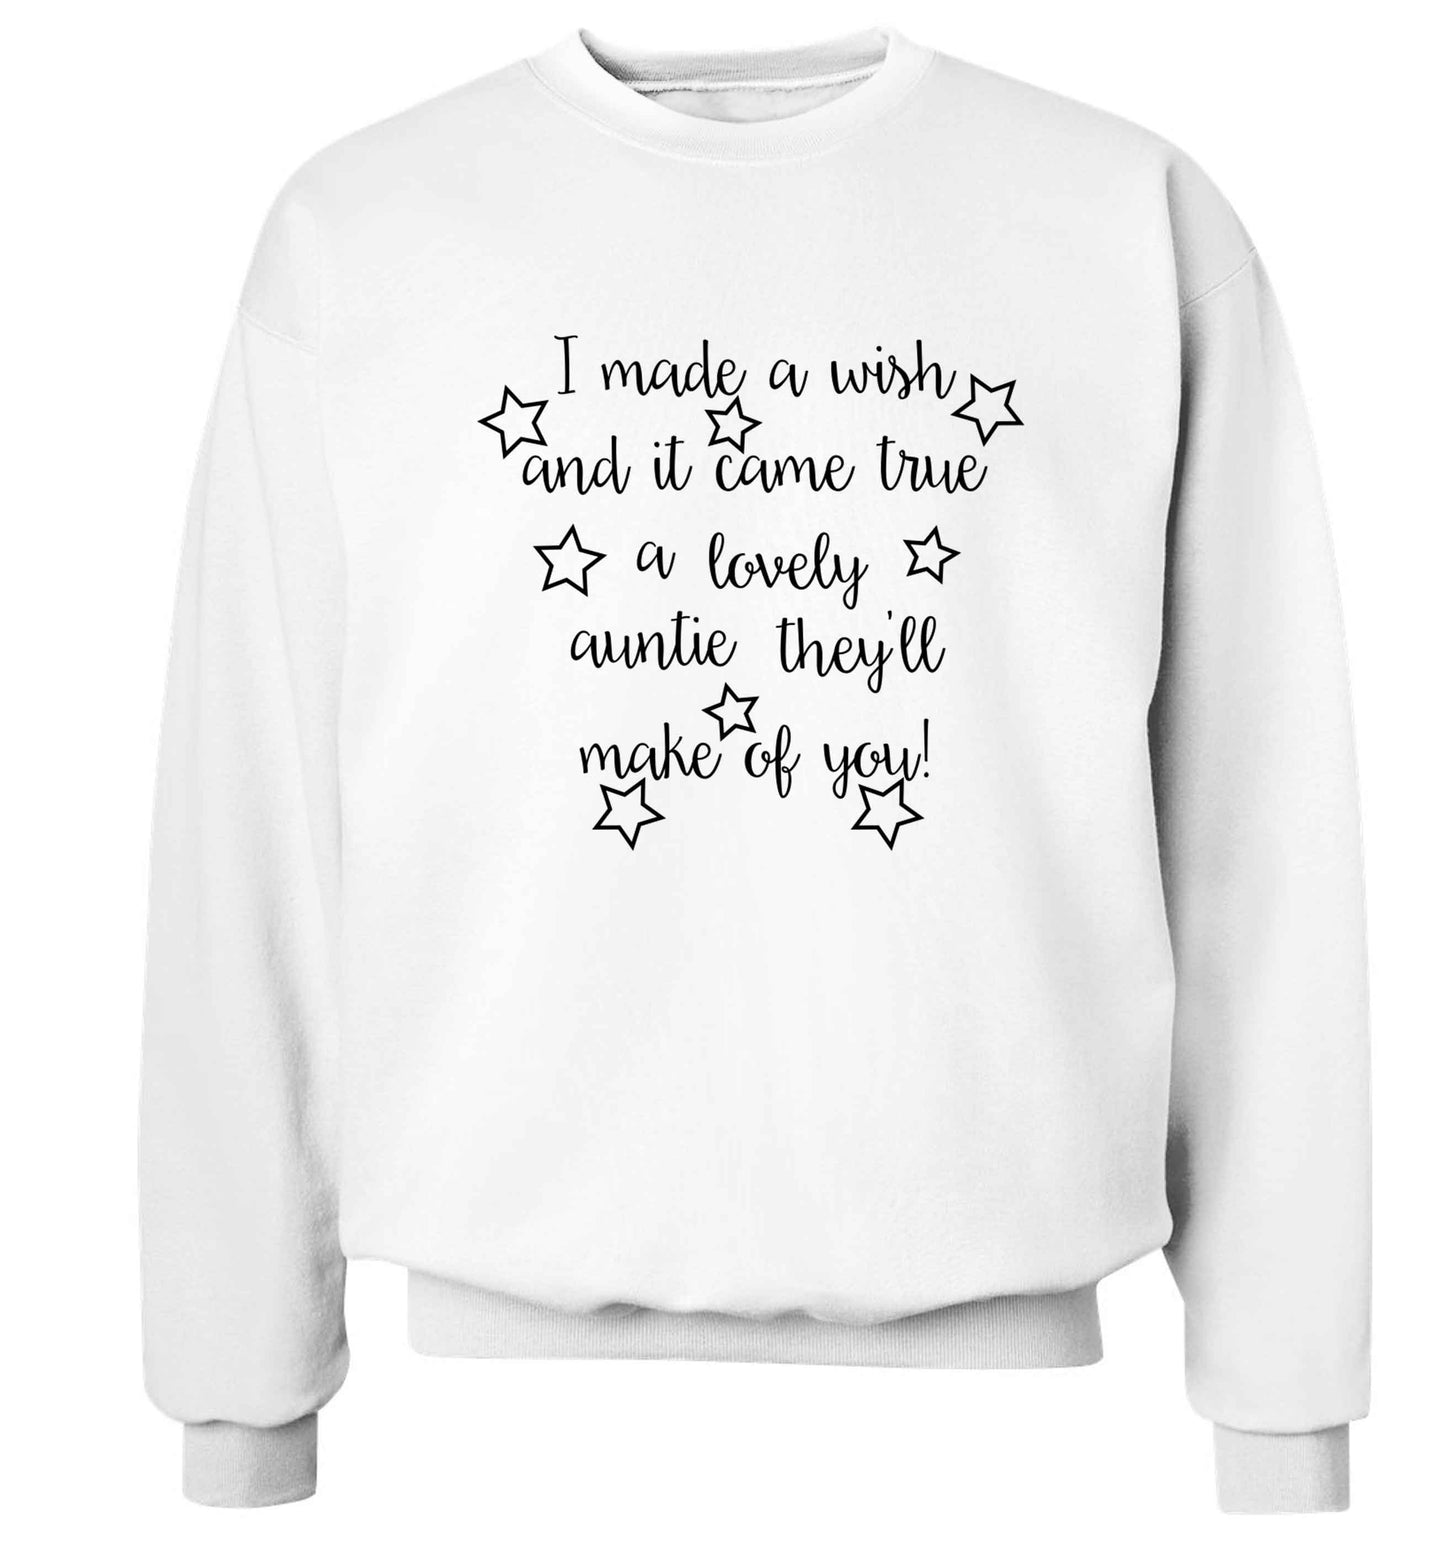 I made a wish and it came true a lovely auntie they'll make of you! Adult's unisex white Sweater 2XL